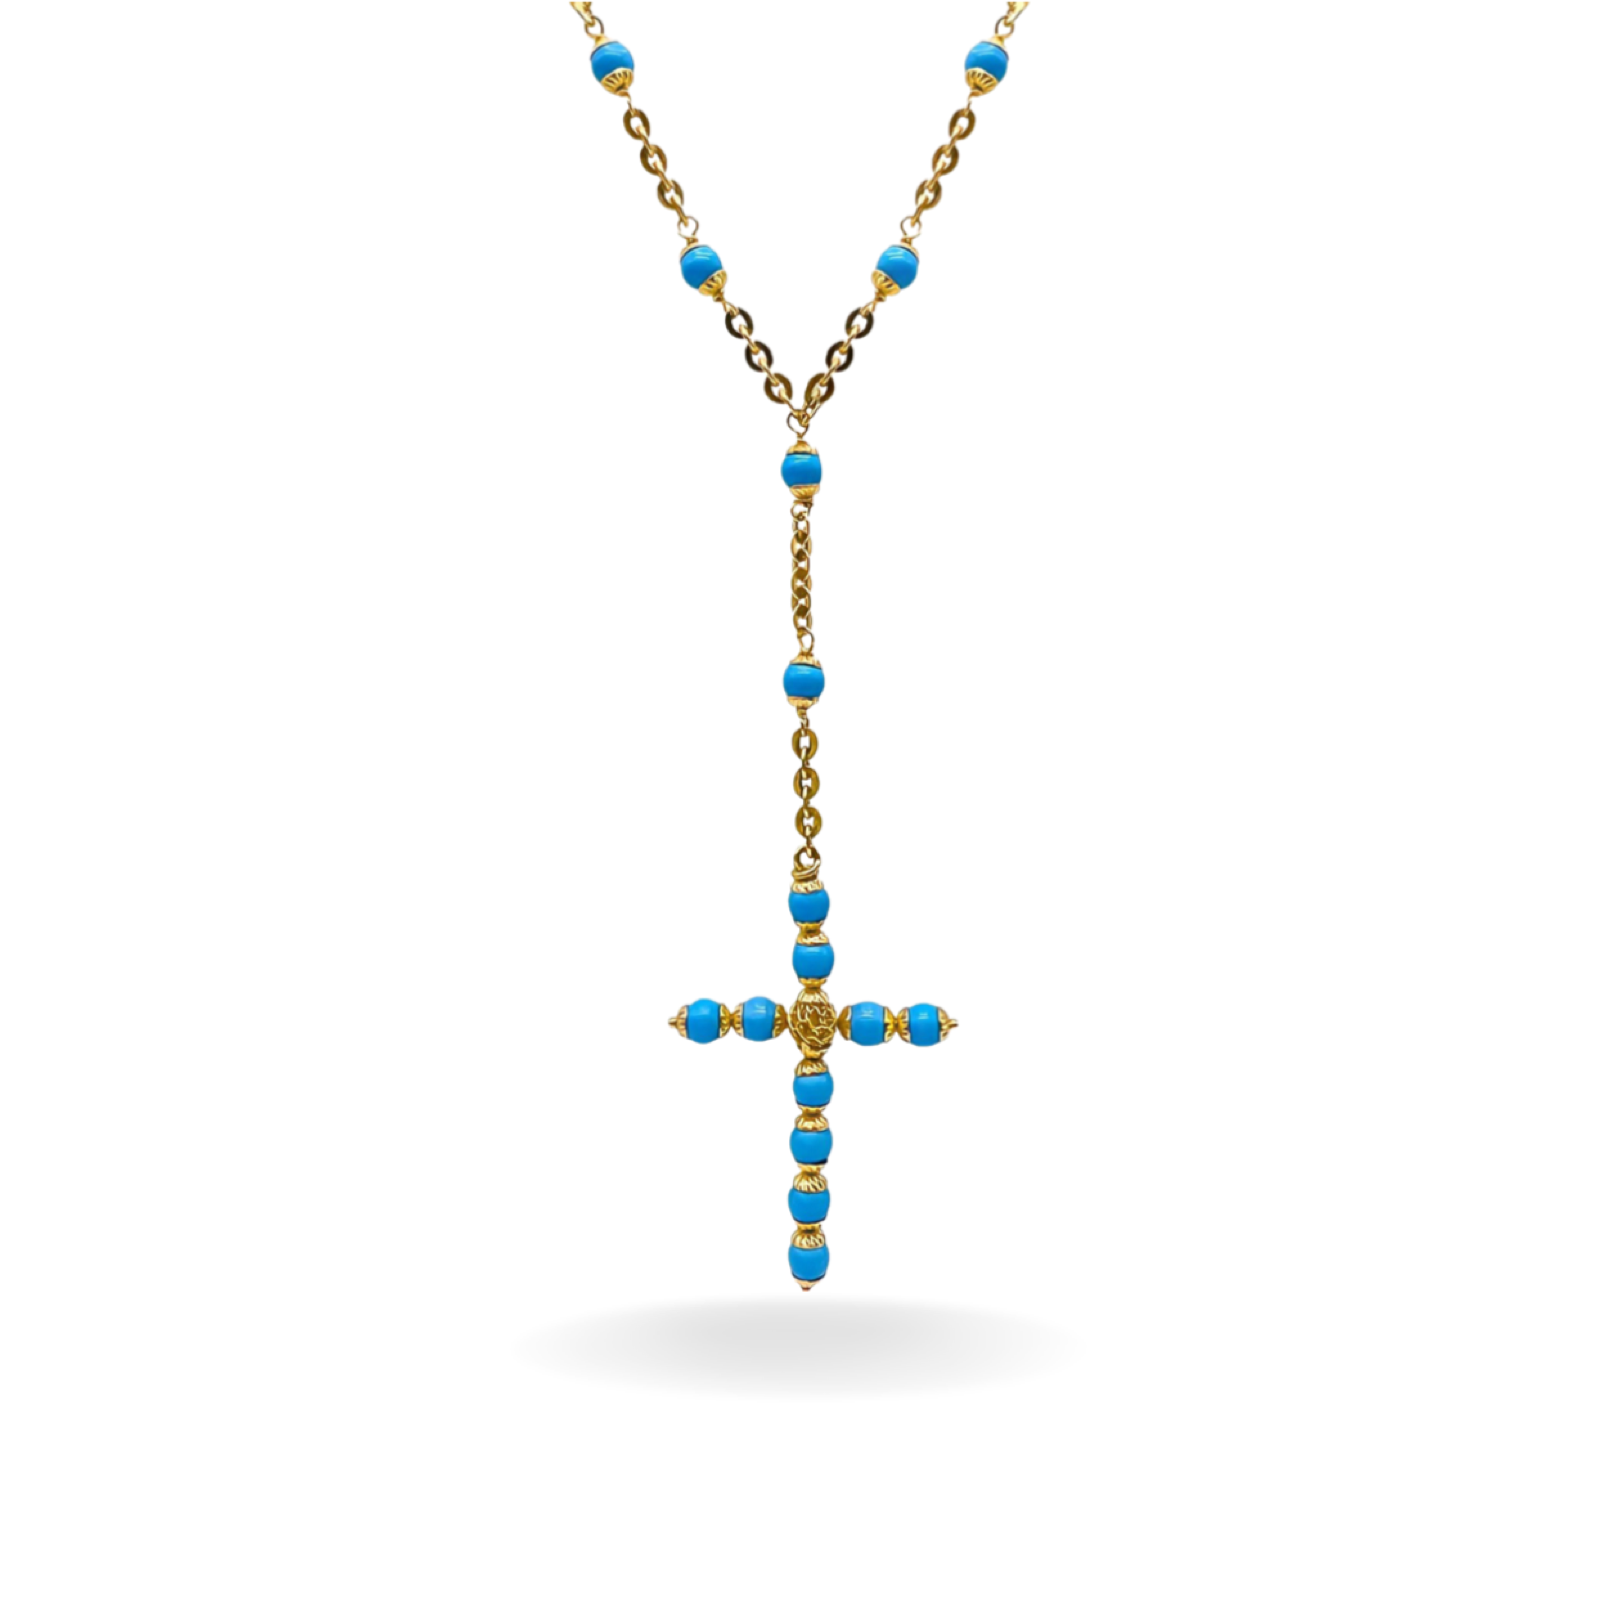 14K YELLOW GOLD TURQUOISE ROSARY